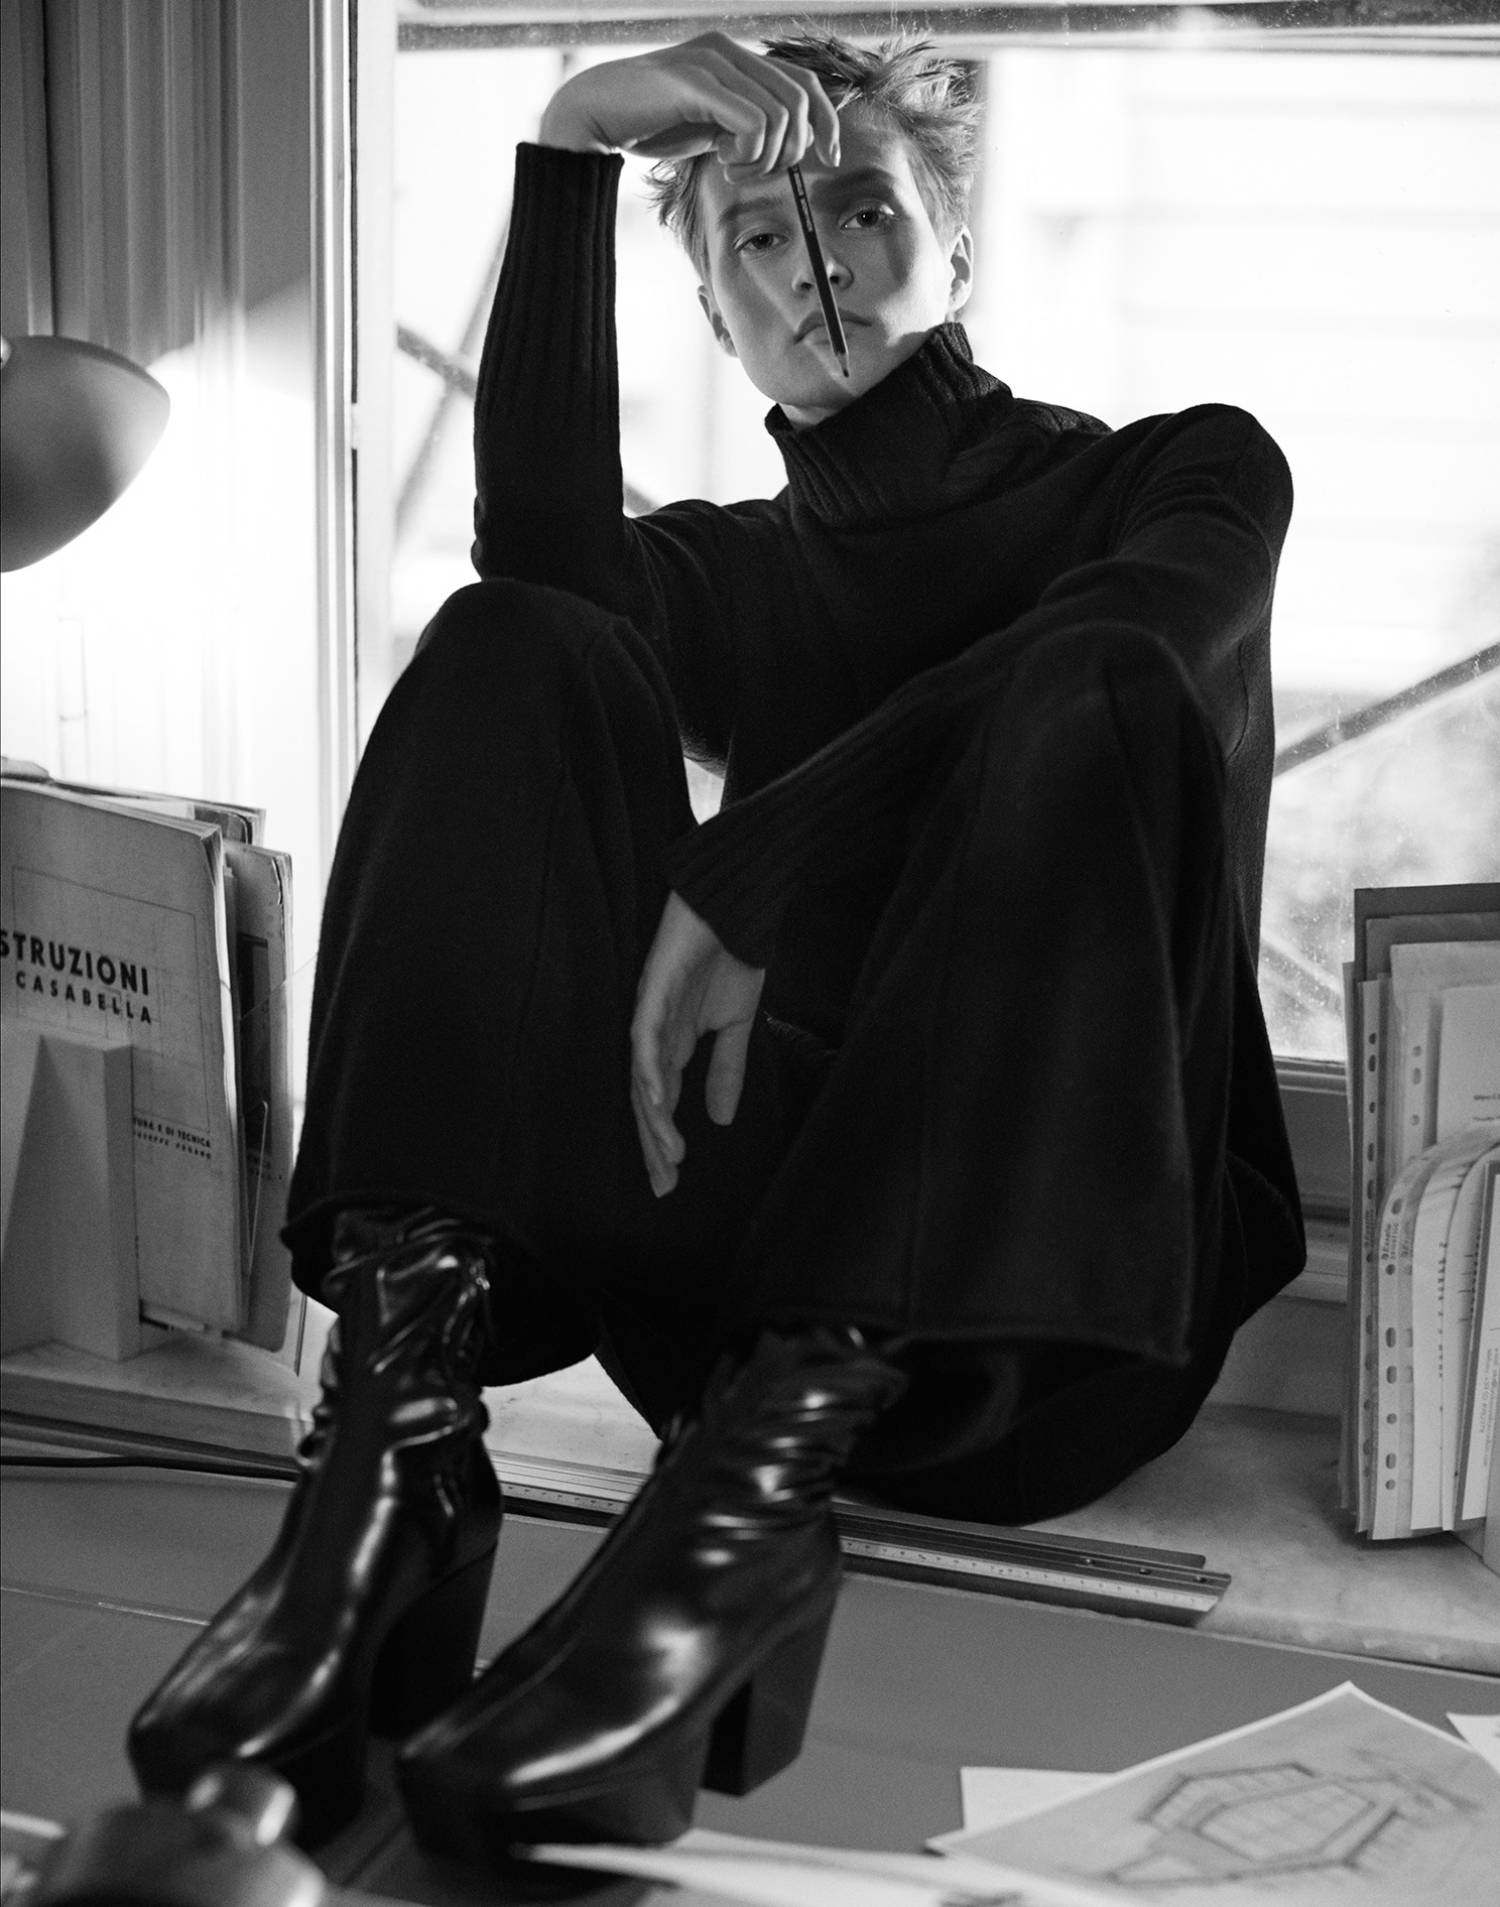 Sofia Hansson by Stefano Galuzzi for Marie Claire Italia November 2021 Clothing & Accessories: Turtleneck and cashmere trousers by Saisei; Boots by Prada